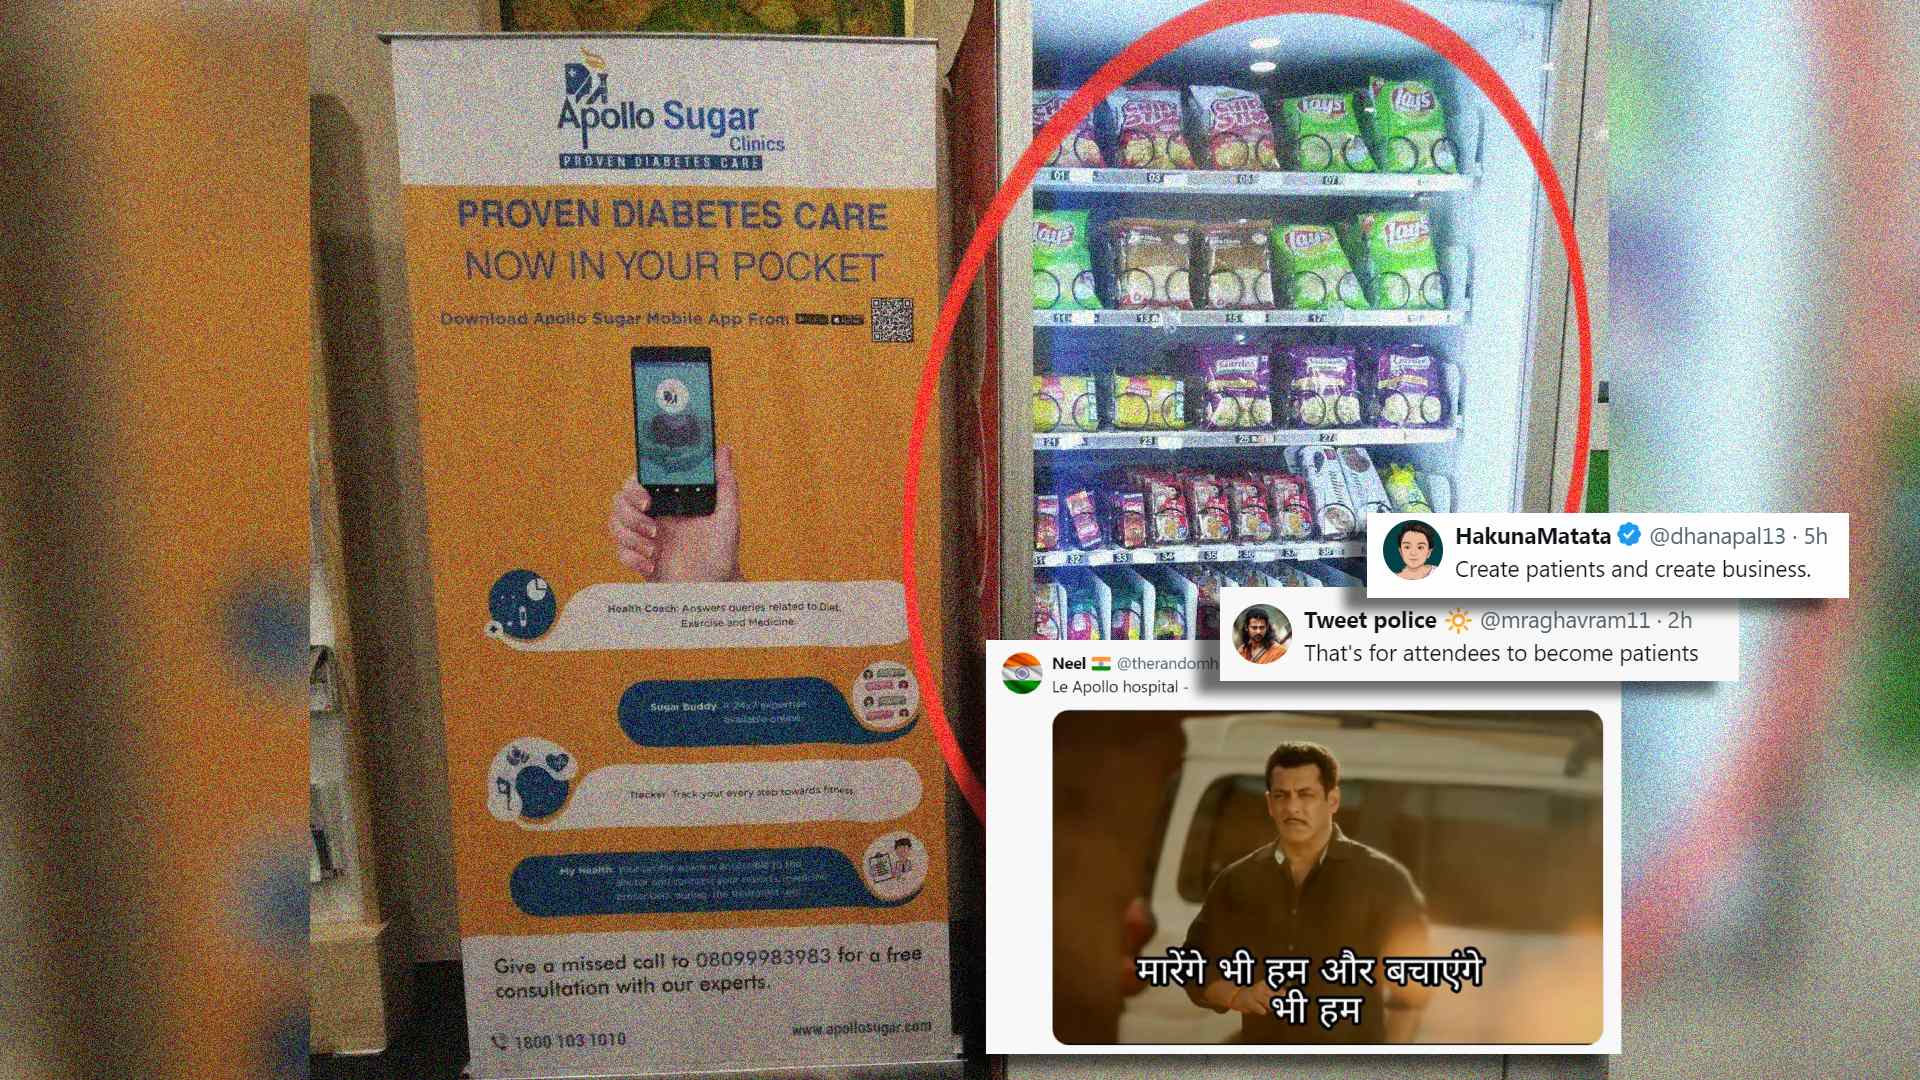 Chips Vending Machine Beside Diabetes Poster Triggers Internet: Its For Attendees To Become Patients [Video]